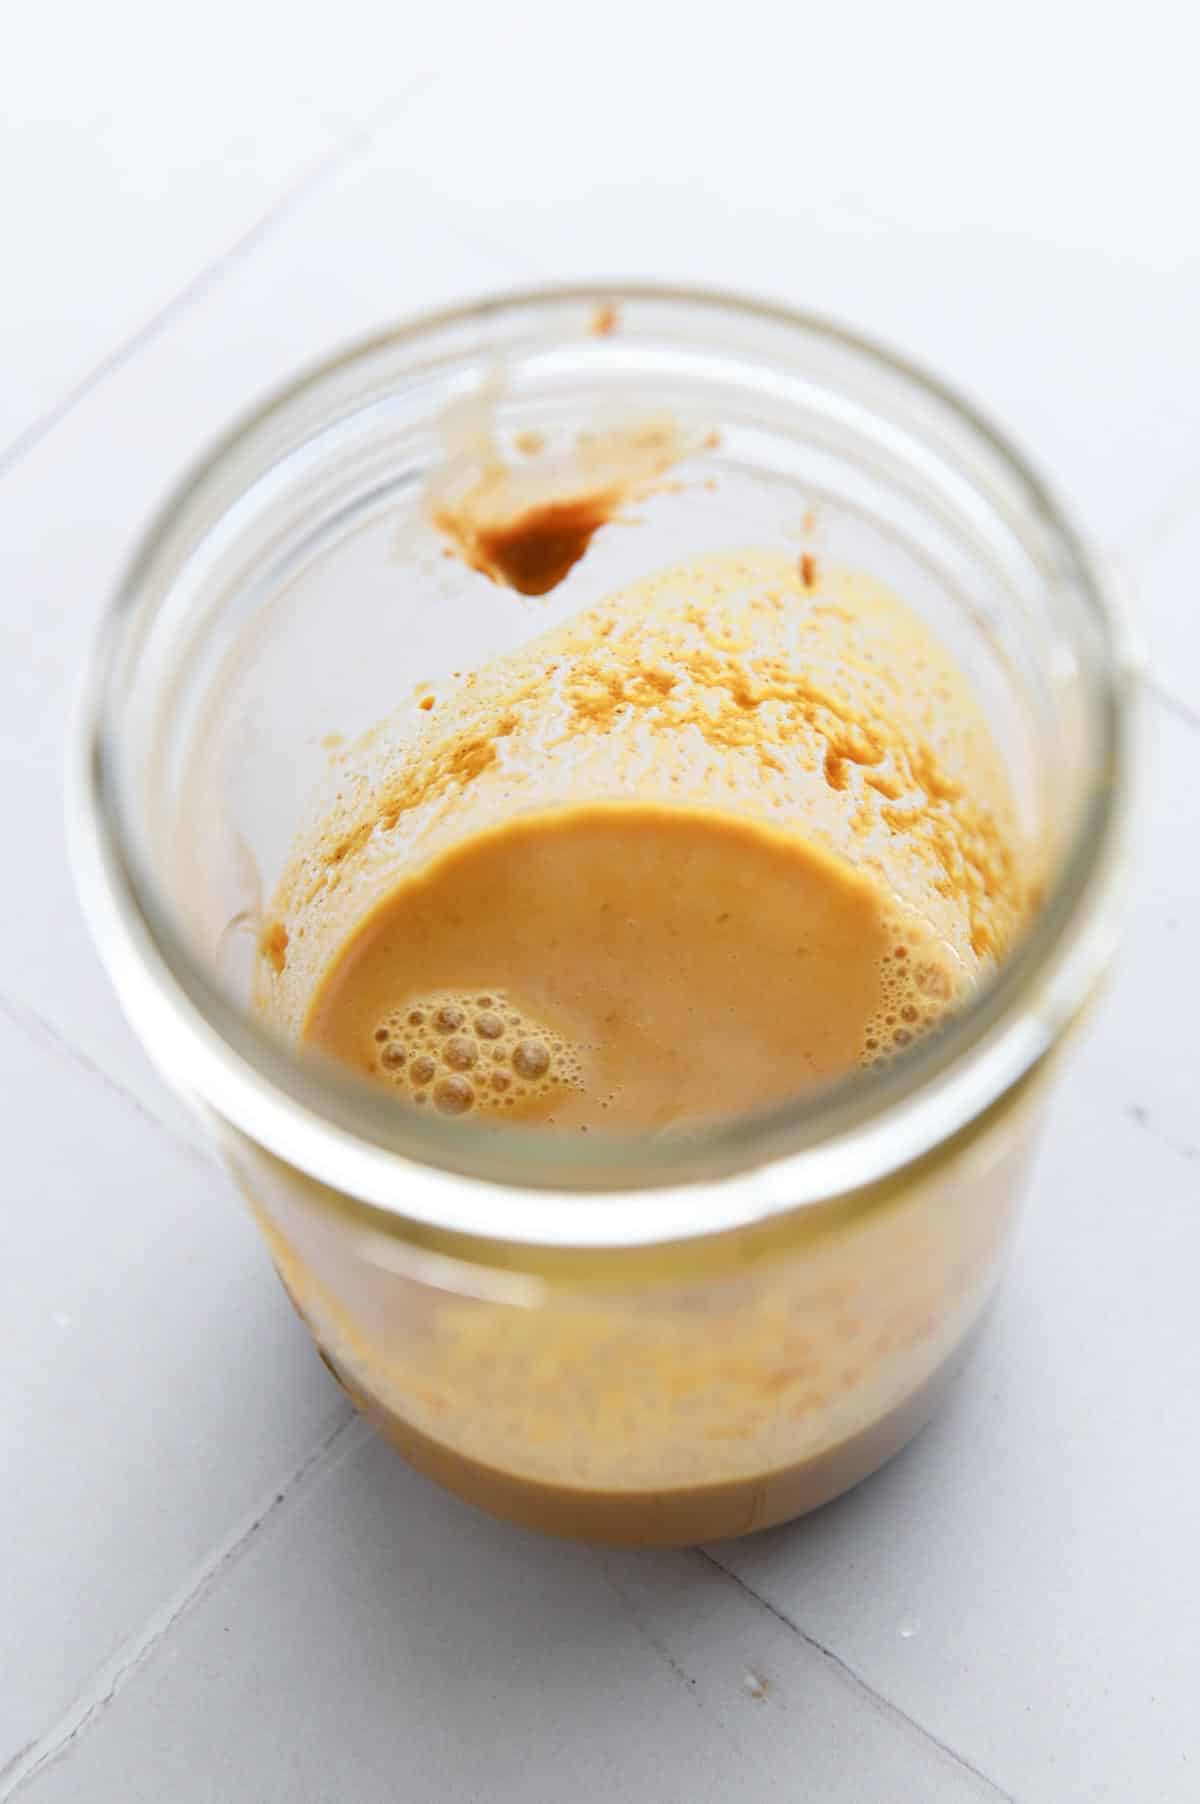 Gold-colored sauce in a glass jar.